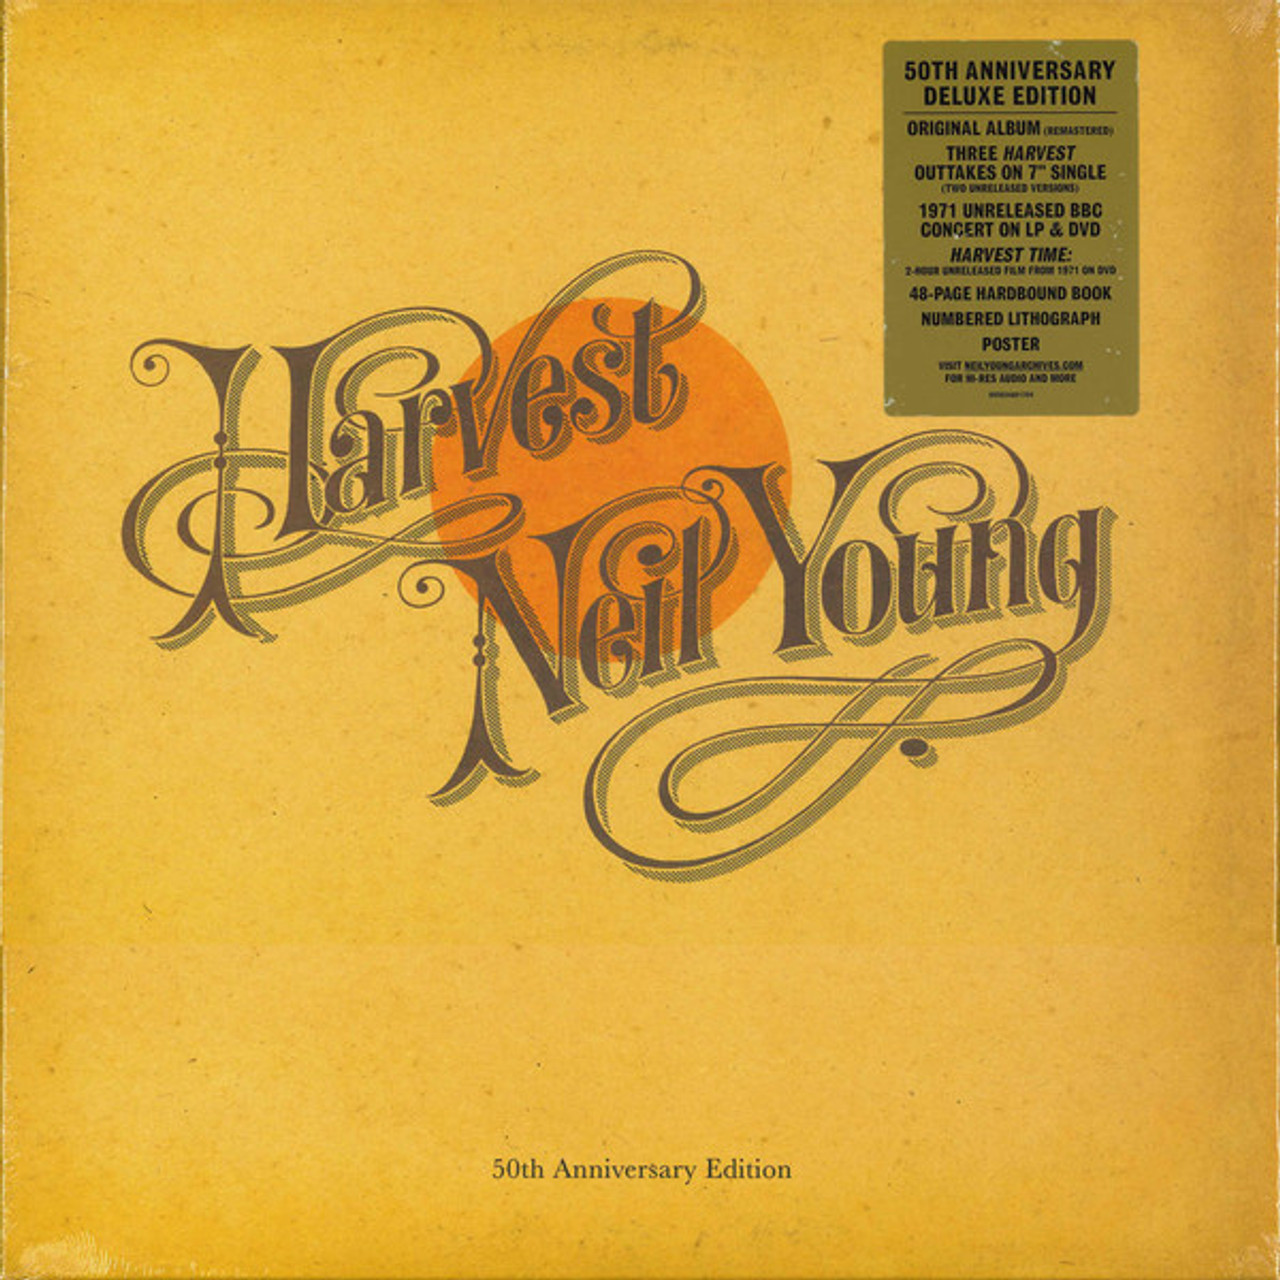 Tell Me Why Song, Neil Young, After The Gold Rush (50th Anniversary)